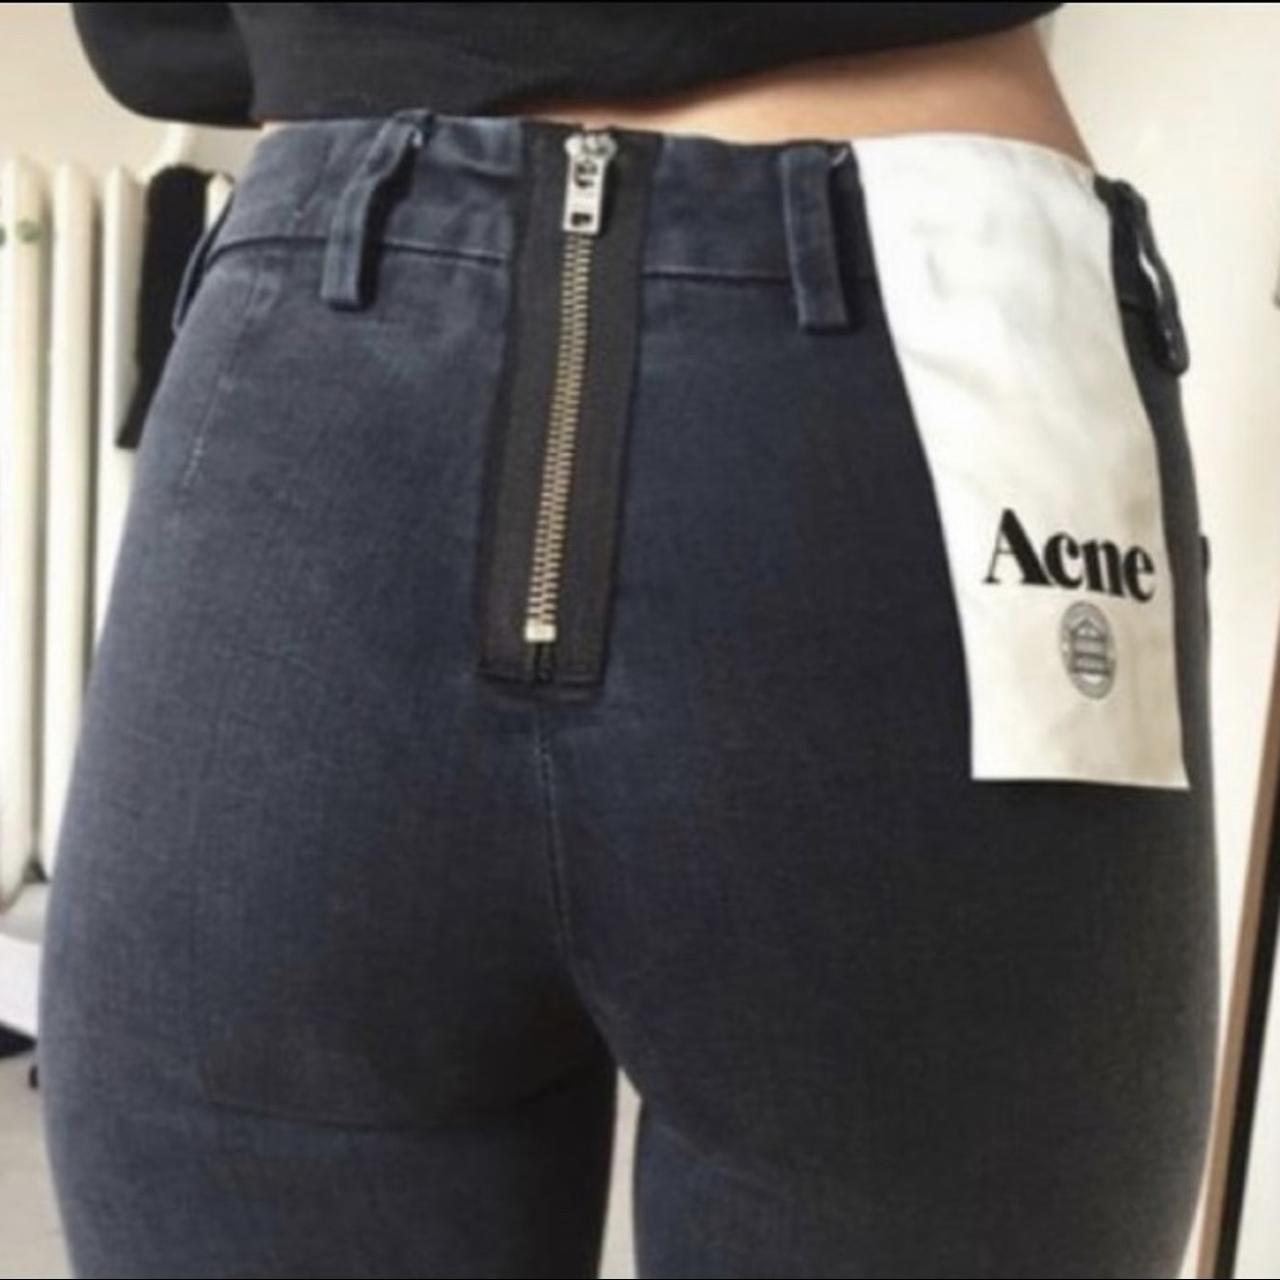 Super fit, tumblr Acne studios jeans with...